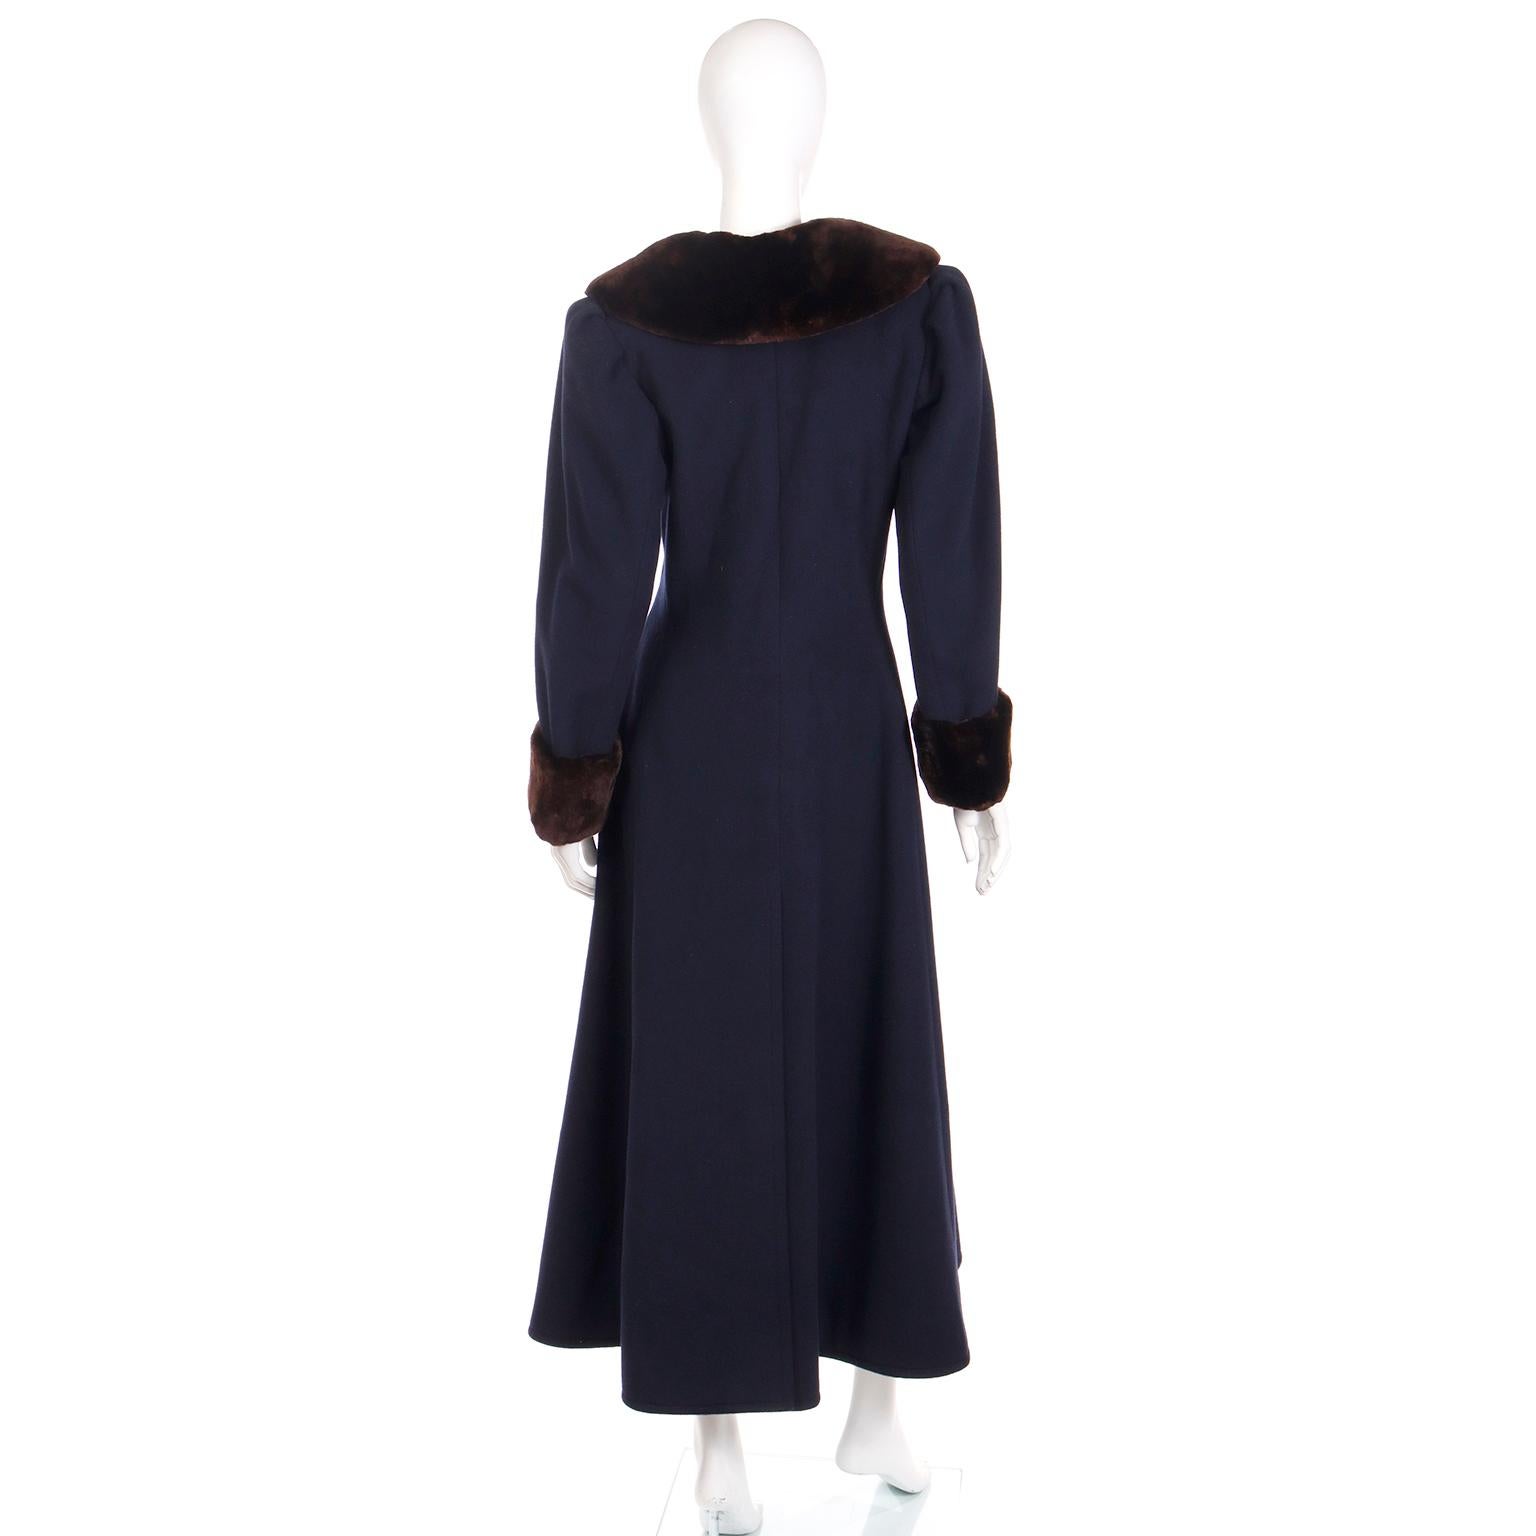 Yves Saint Laurent Haute Couture 1976 Navy Blue Wool Coat w Sheared Mink Trim In Excellent Condition For Sale In Portland, OR